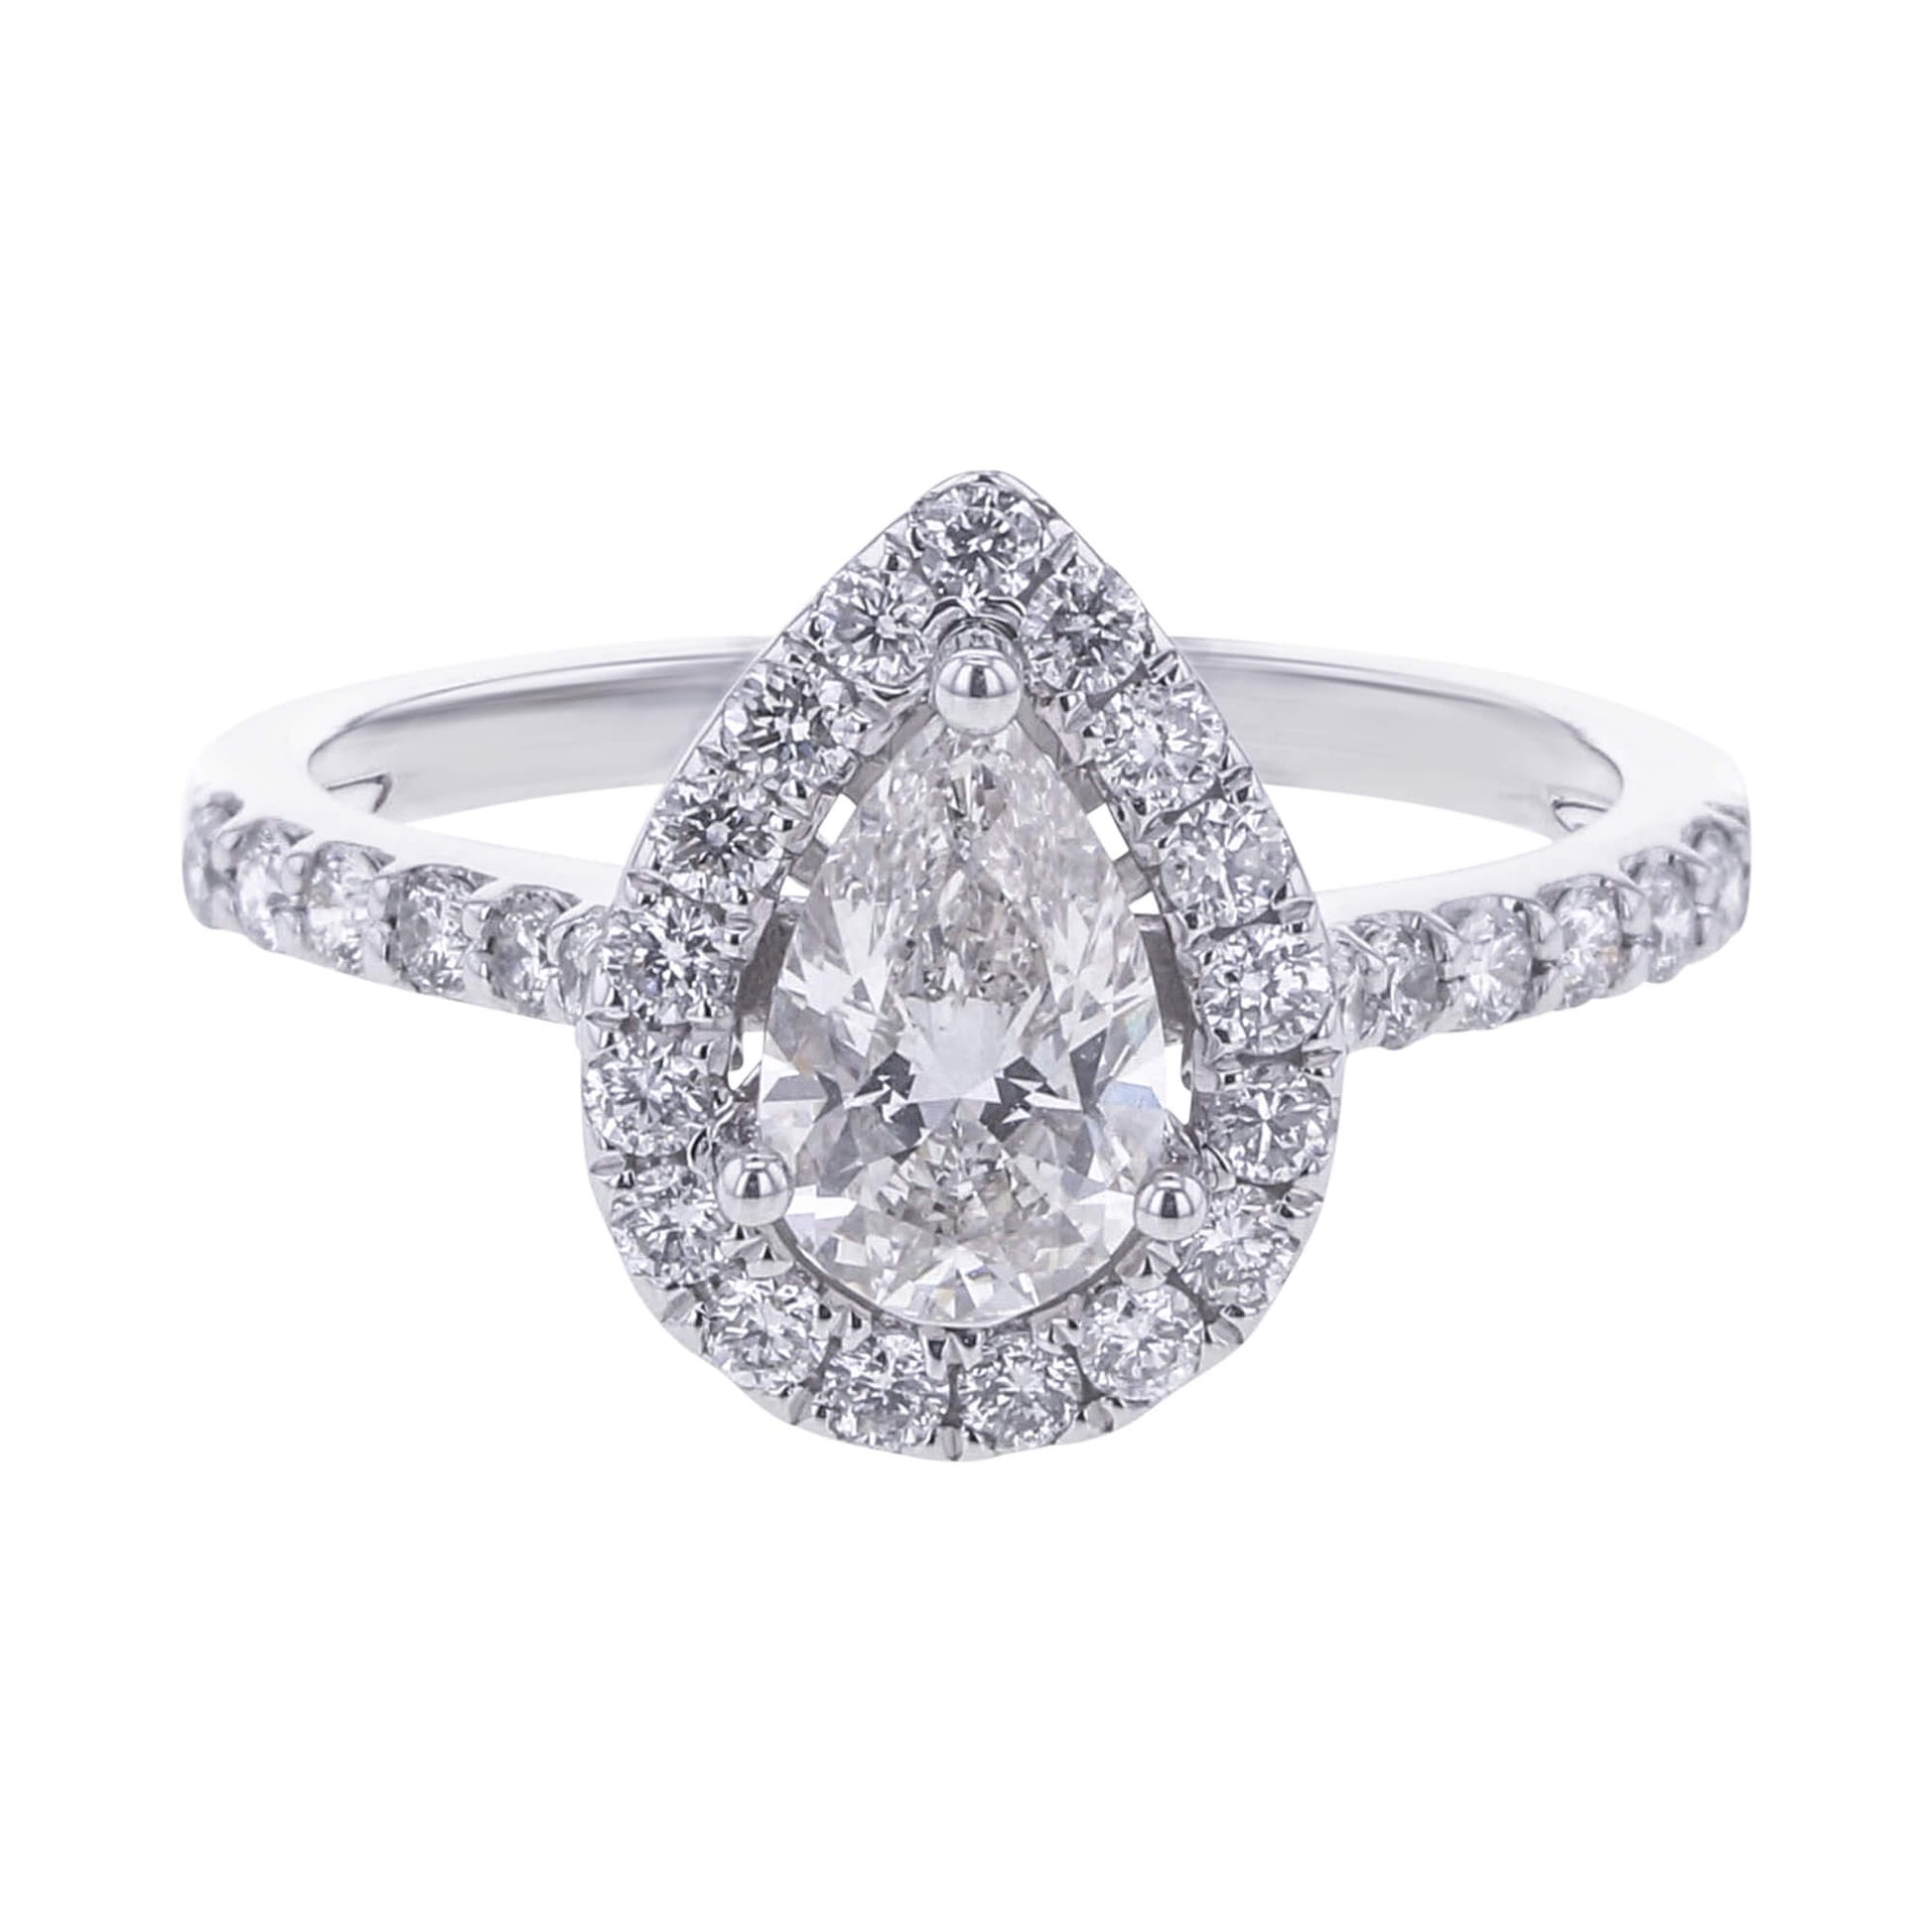 Juliette Ready for Love Diamond Engagement Ring 1 1/8ct